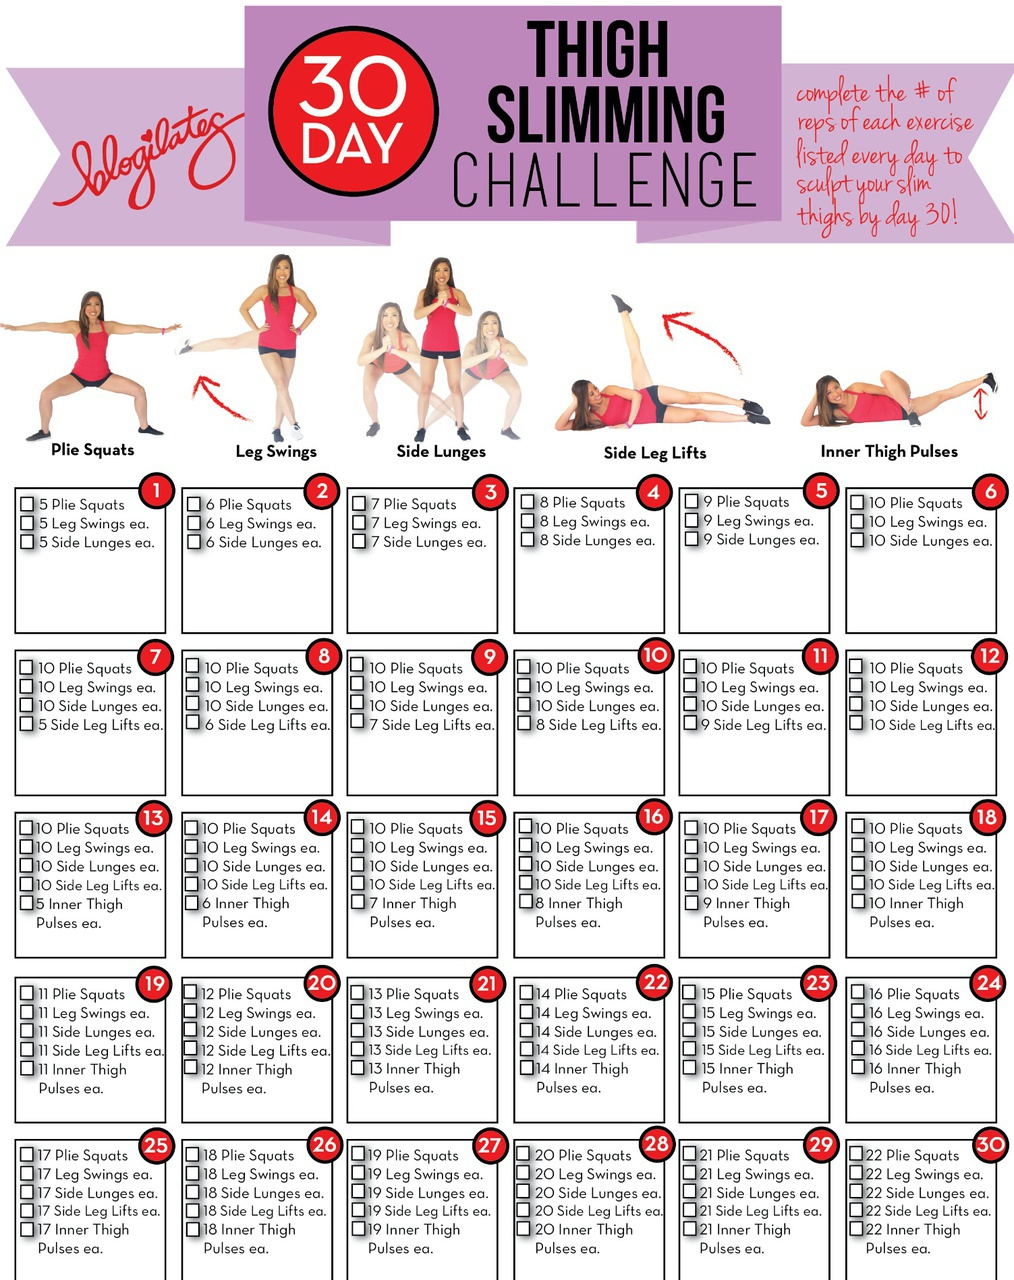 Thigh Slimming Challenge  Image #4874316 By Sharleen On throughout 30 Day Inner Thigh Challenge